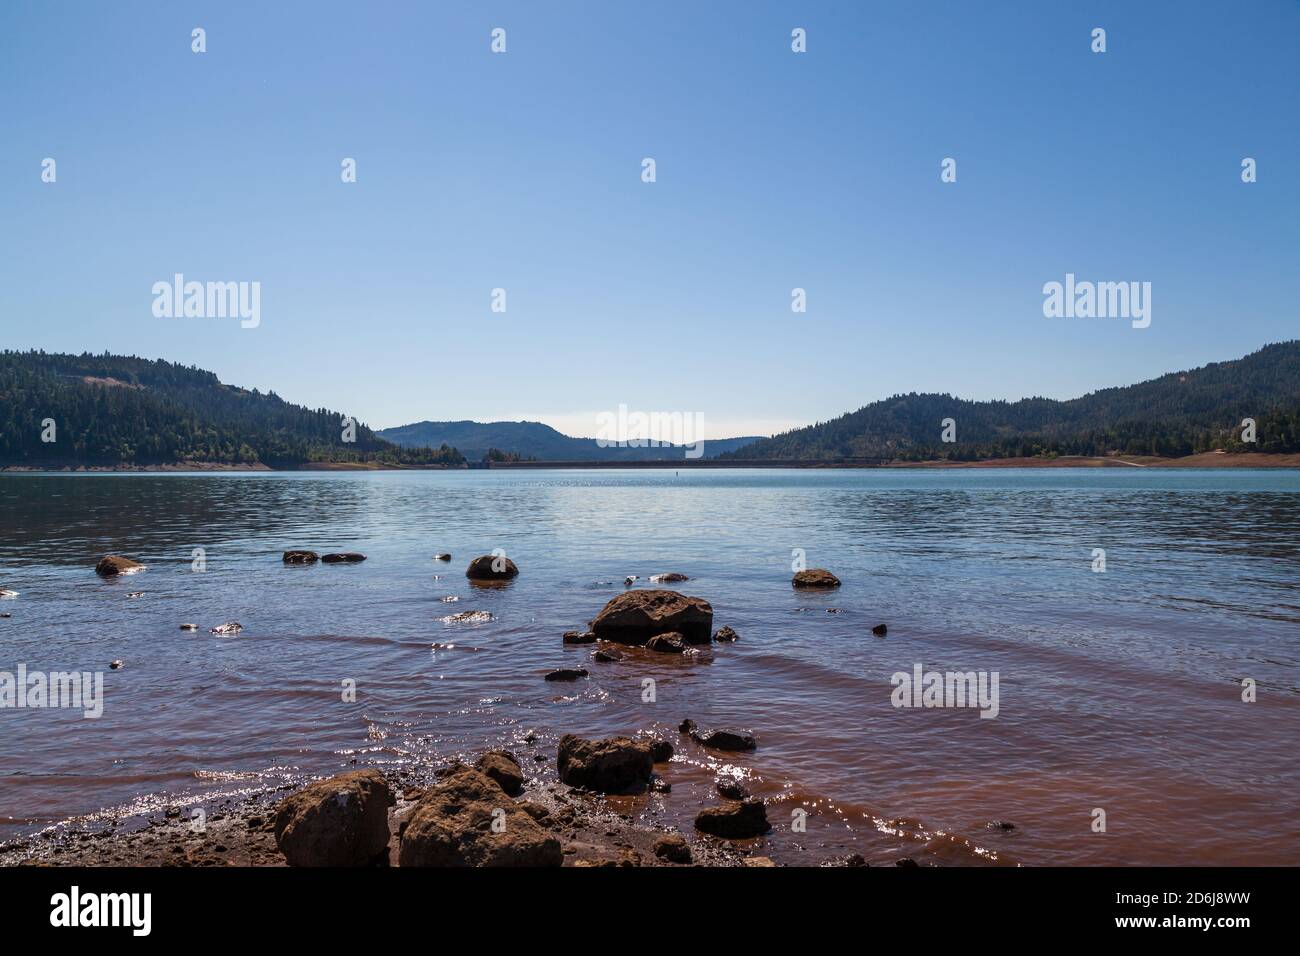 Looking across the surface of Lost Creek Lake to the William L. Jess Dam with a rocky foreground and the Cascade Mountains in the distance. Stock Photo